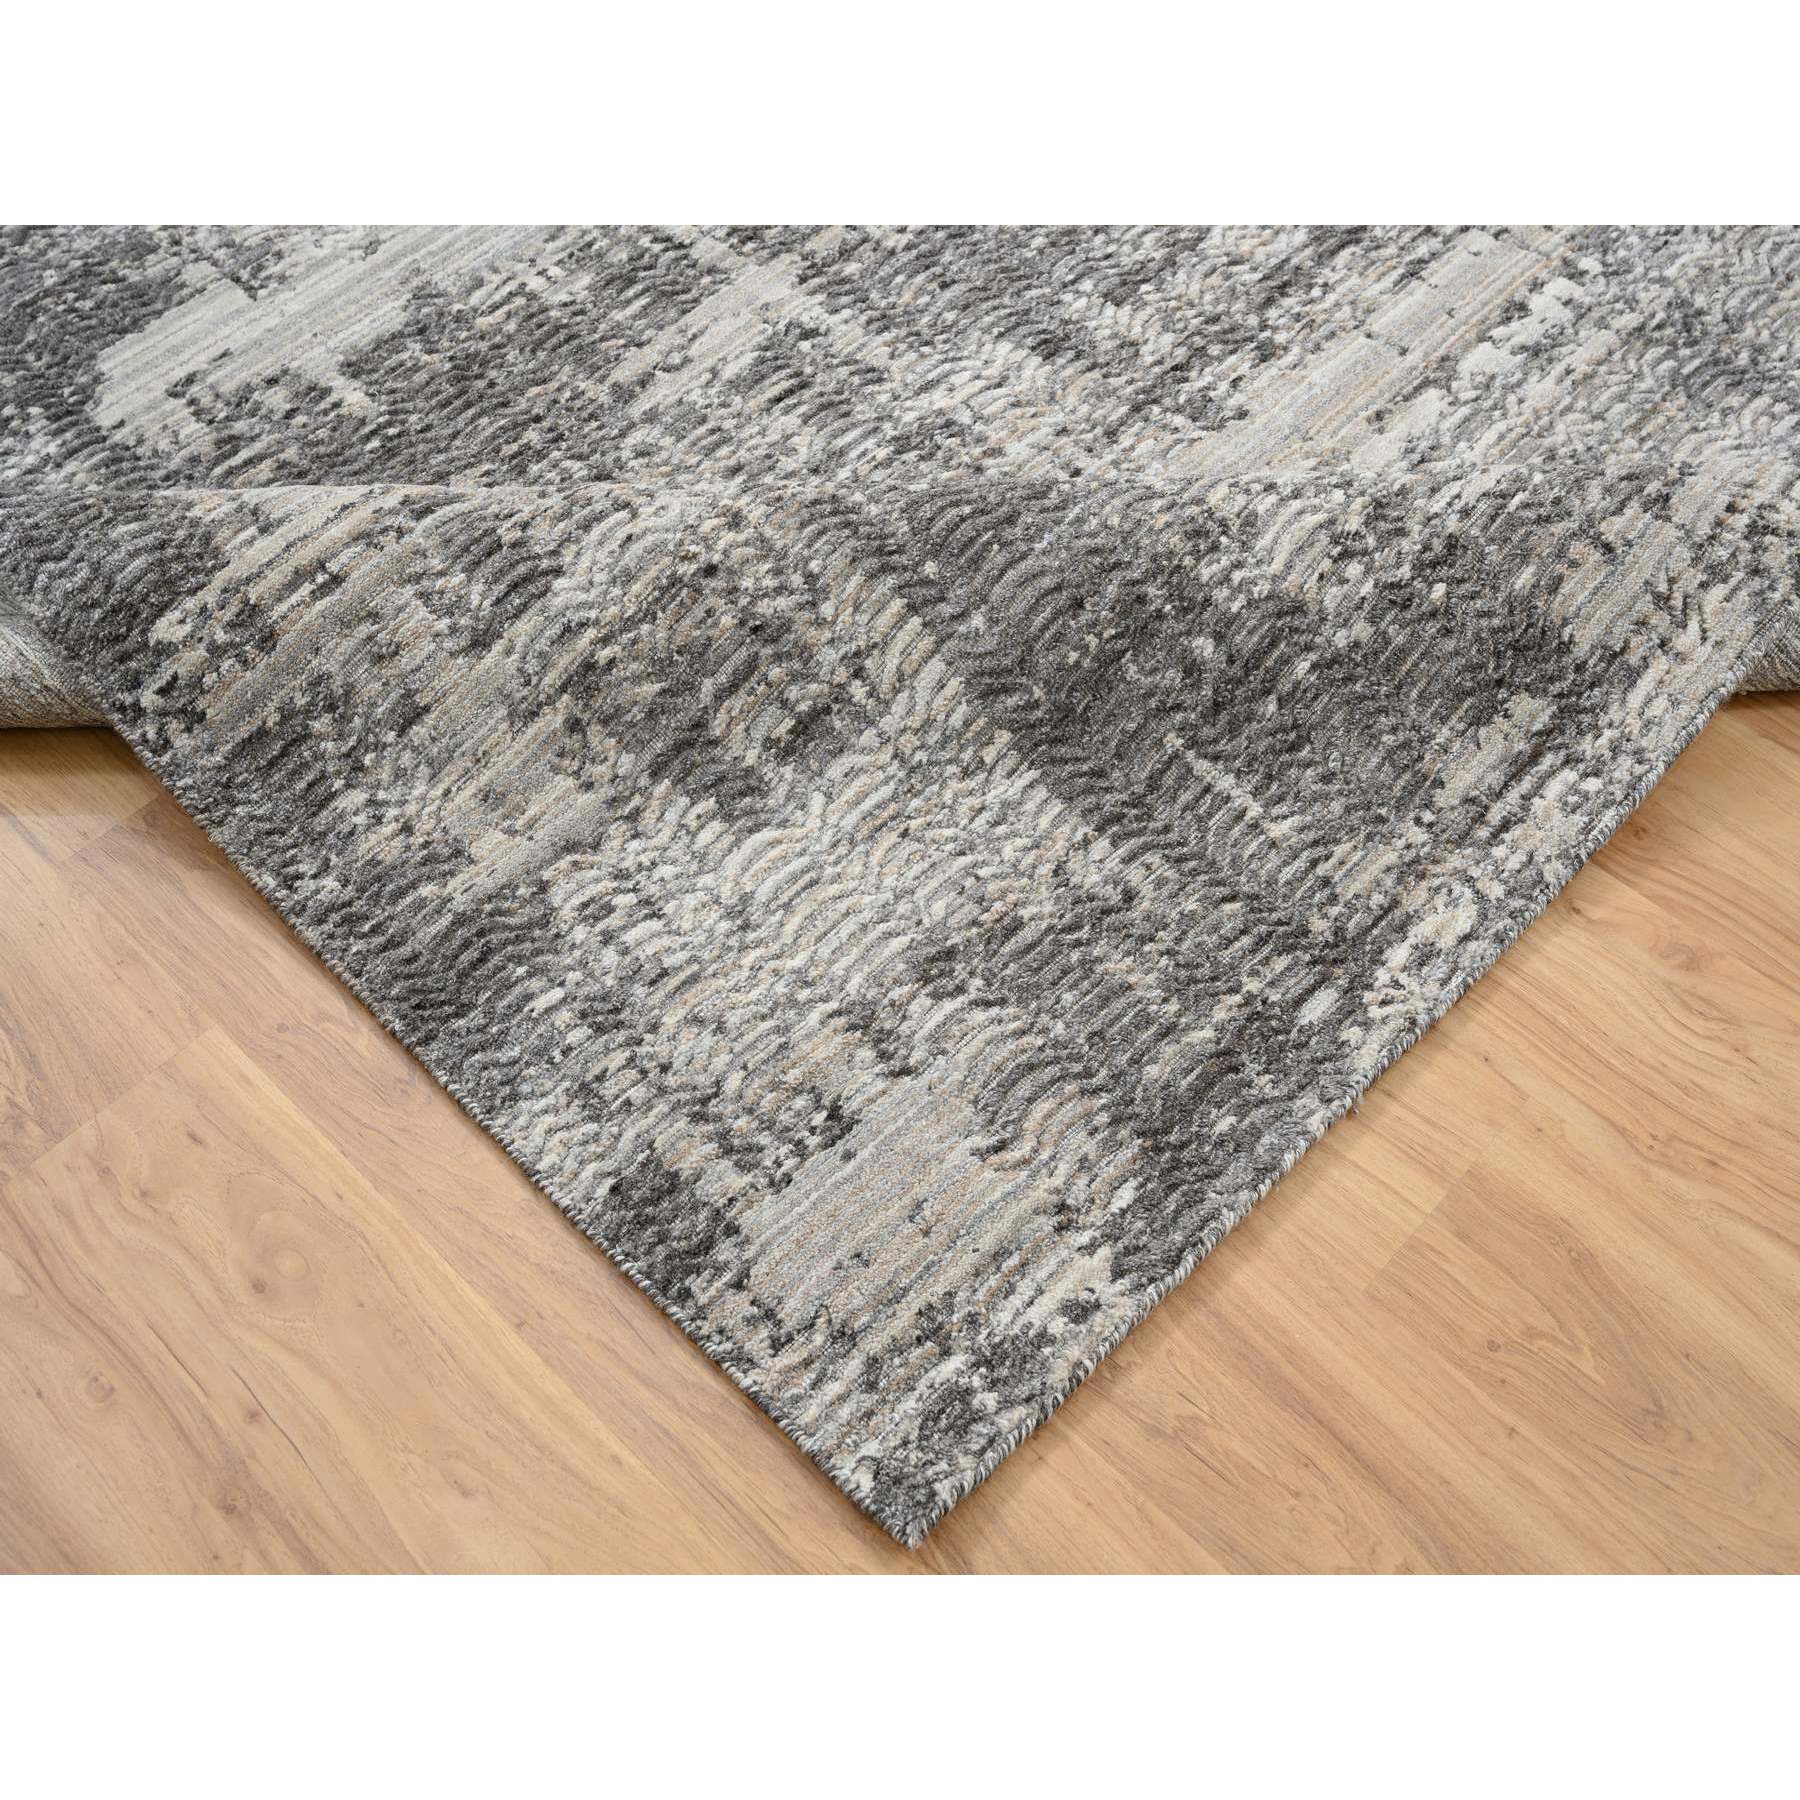 8'1"x10' Gray Variegated Texture Modern Abstract Design, Natural Wool, Hand Loomed Oriental Rug 